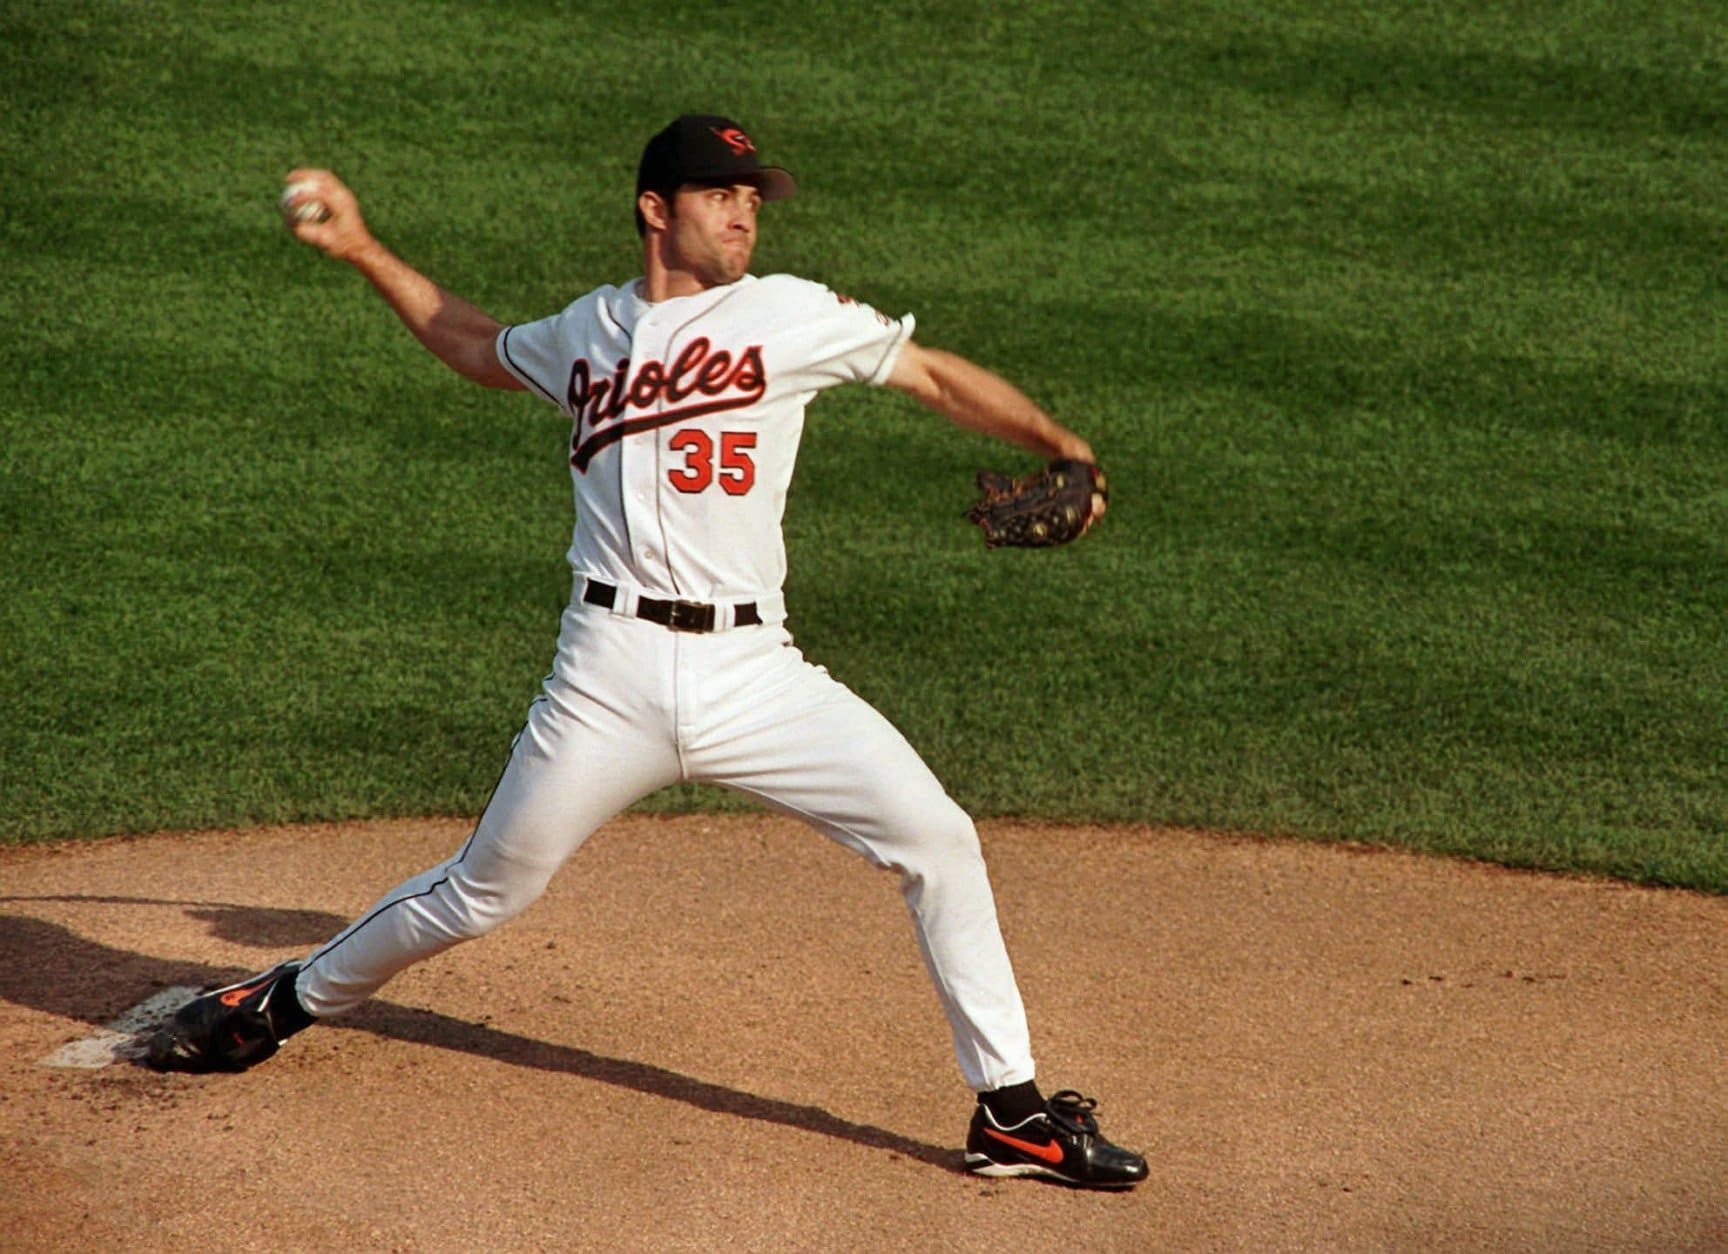 2019 Baseball Hall of Fame class: Orioles' Mussina, Yankees